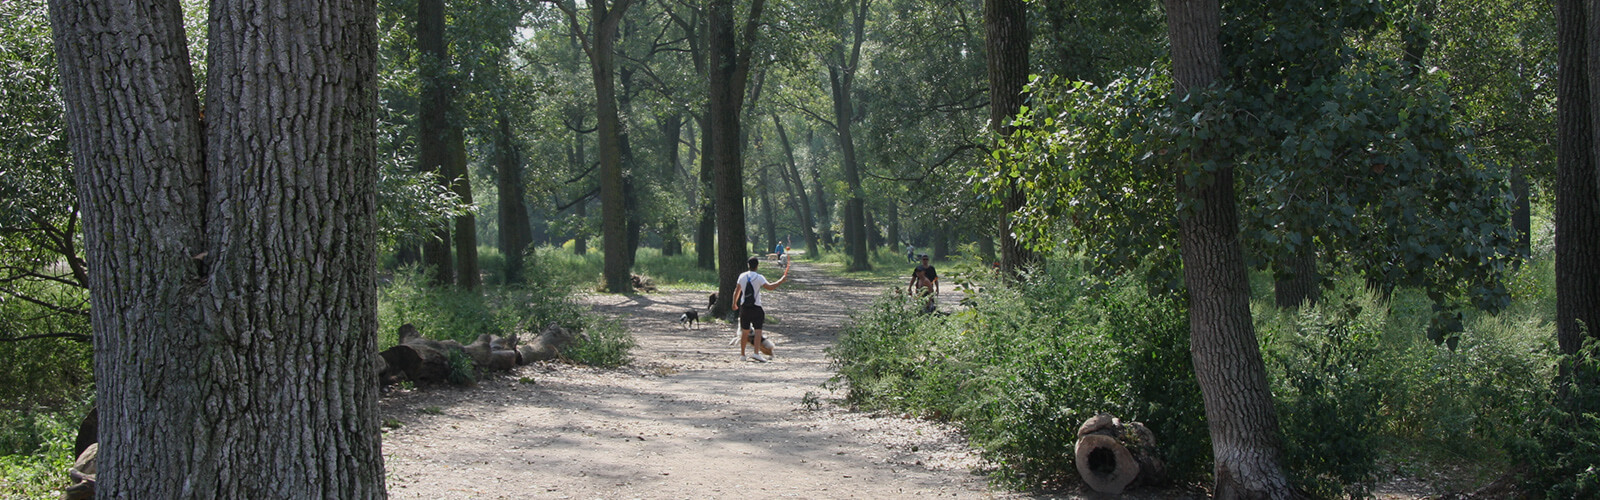 Wide sandy path leads from the foreground into the background. It winds through a wooded area with very tall lush trees and other shrubs and greenery. A man walks with his dog and waves to someone else on the path.